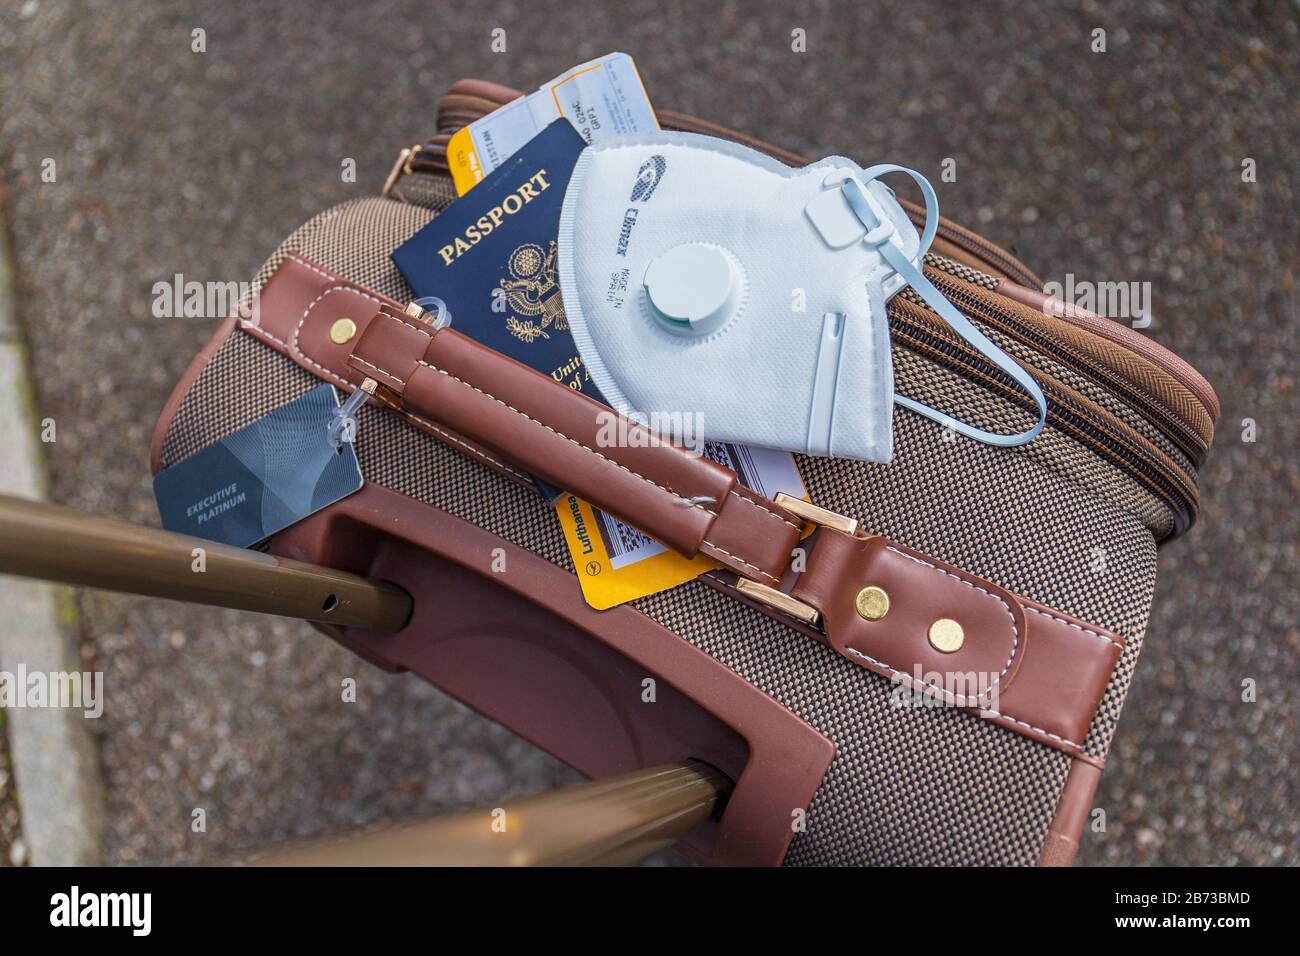 Boston, USA - March 13th 2020: Air traveler business baggage with face mask for protection against the sars-cov-2 virus. Stock Photo